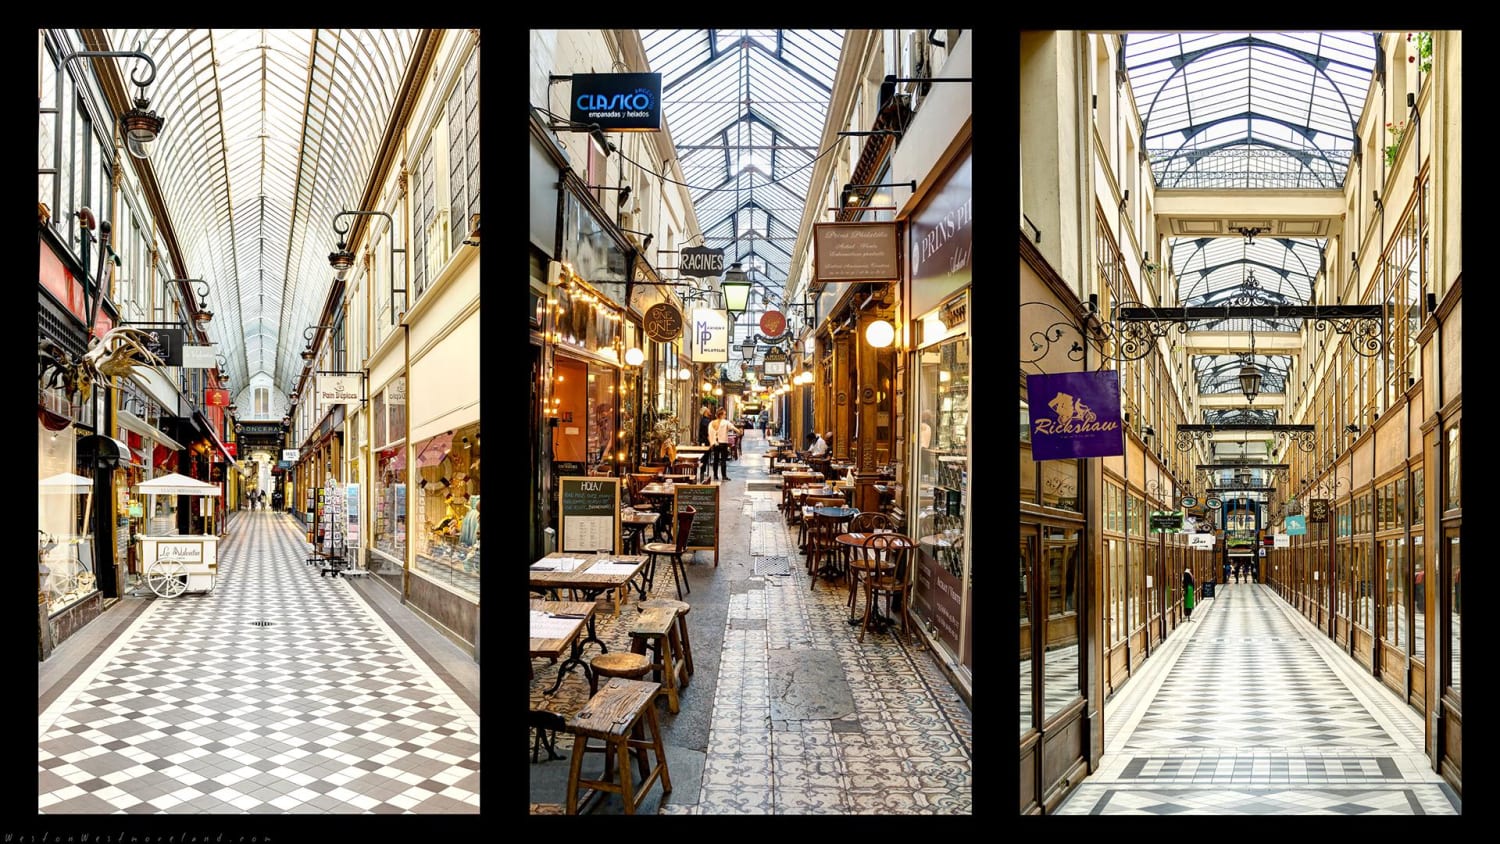 Parisienne Walkways. These covered passages were an early form of shopping arcade built in Paris during the 19th century. Of the 150 built by the 1850s only a few remain. These passages connected 2 streets, were all paved, covered with glass ceilings, artificially illuminated, and privately owned.